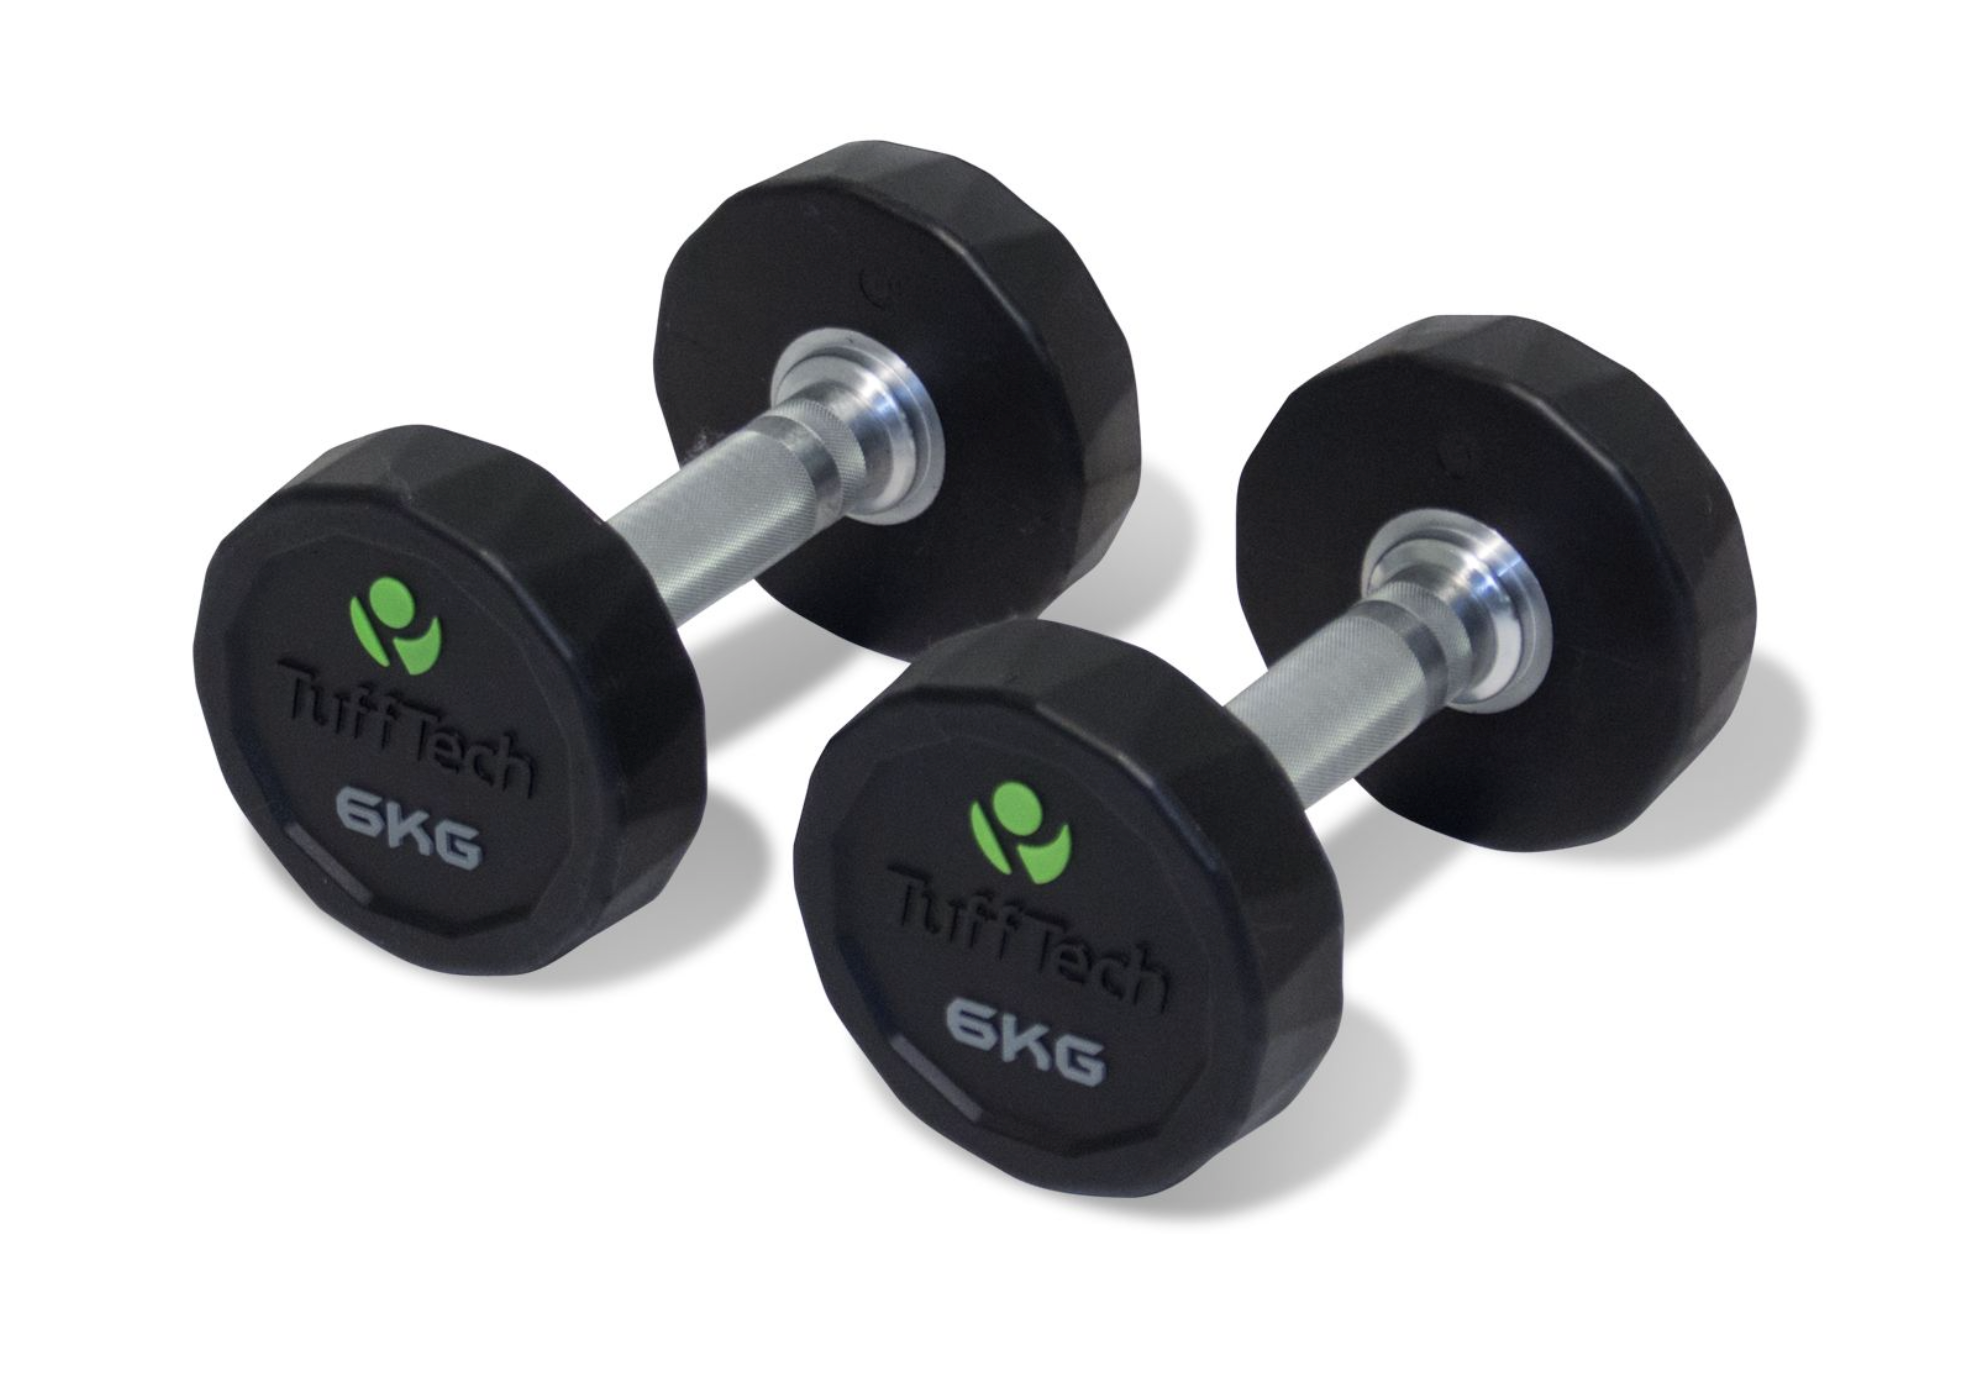 Physical Company TuffTech PU Dumbbells (Pairs)